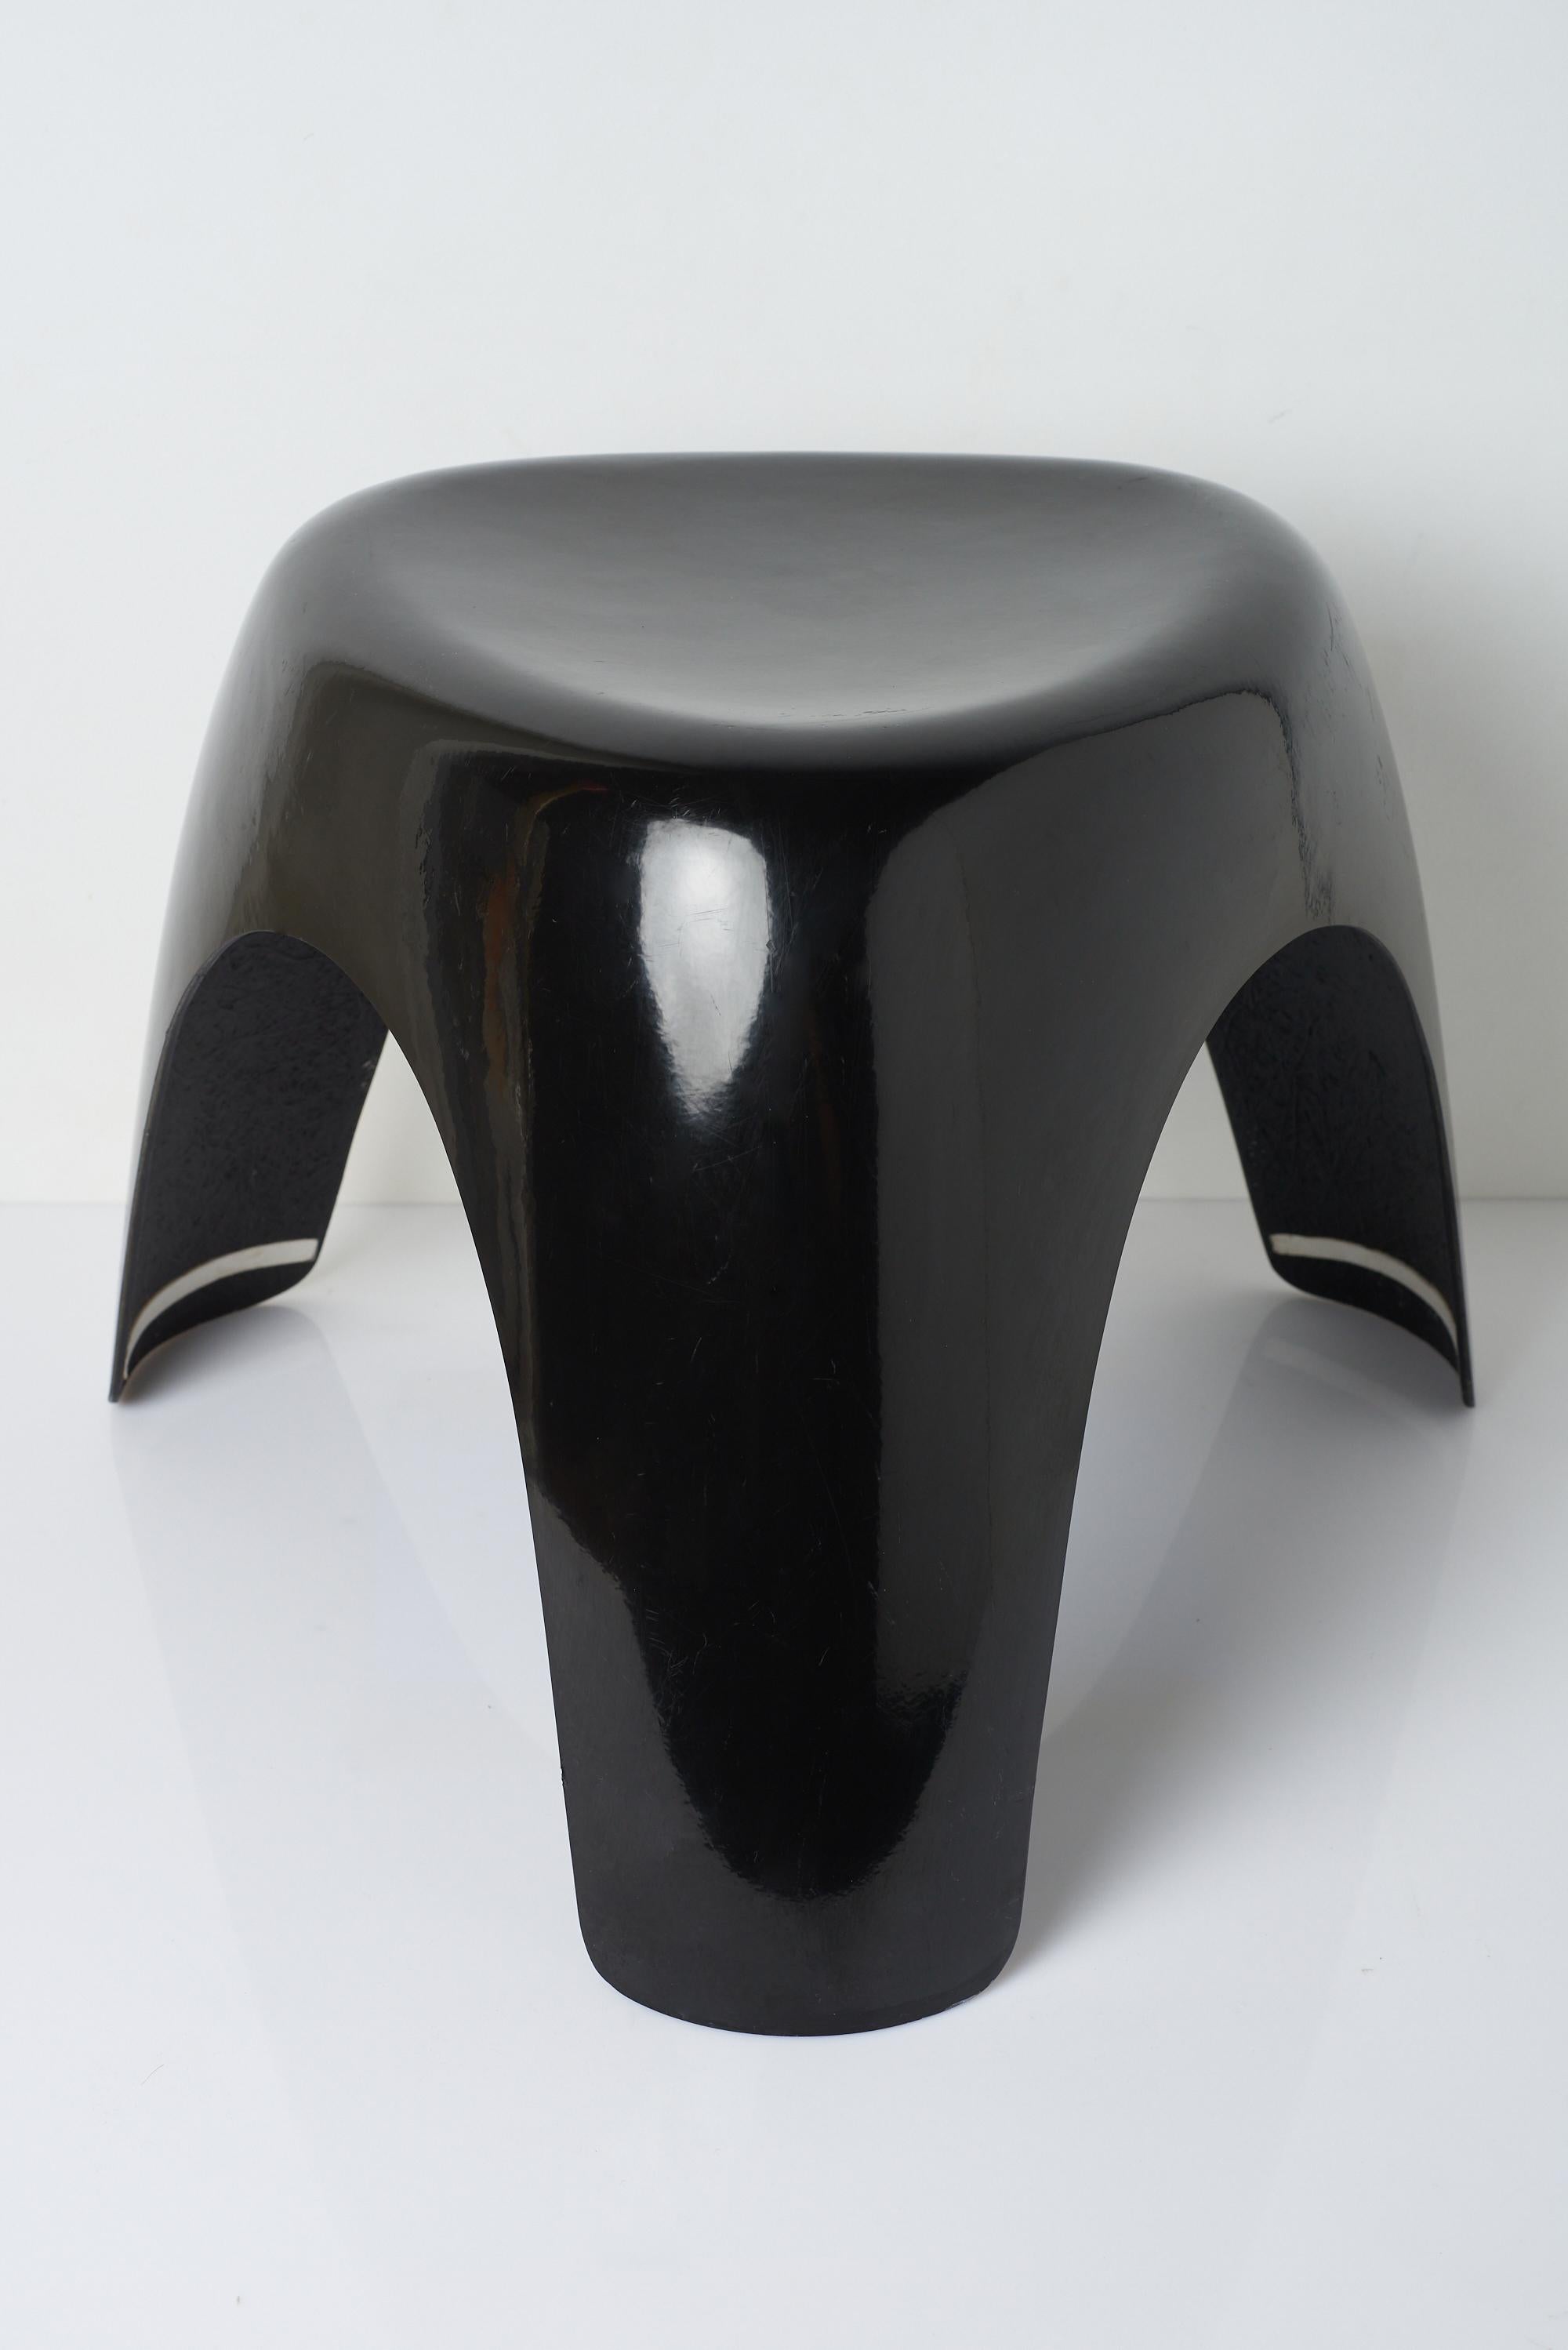 Elephant fiberglass stool by Sori Yanagi, limited edition for Habitat, 2001.No longer in production. The stool has since been reissued by vitra in polypropylene.
Originally designed by the Japanese designer Sori Yanagi for Kotobuki in 1954.
Very